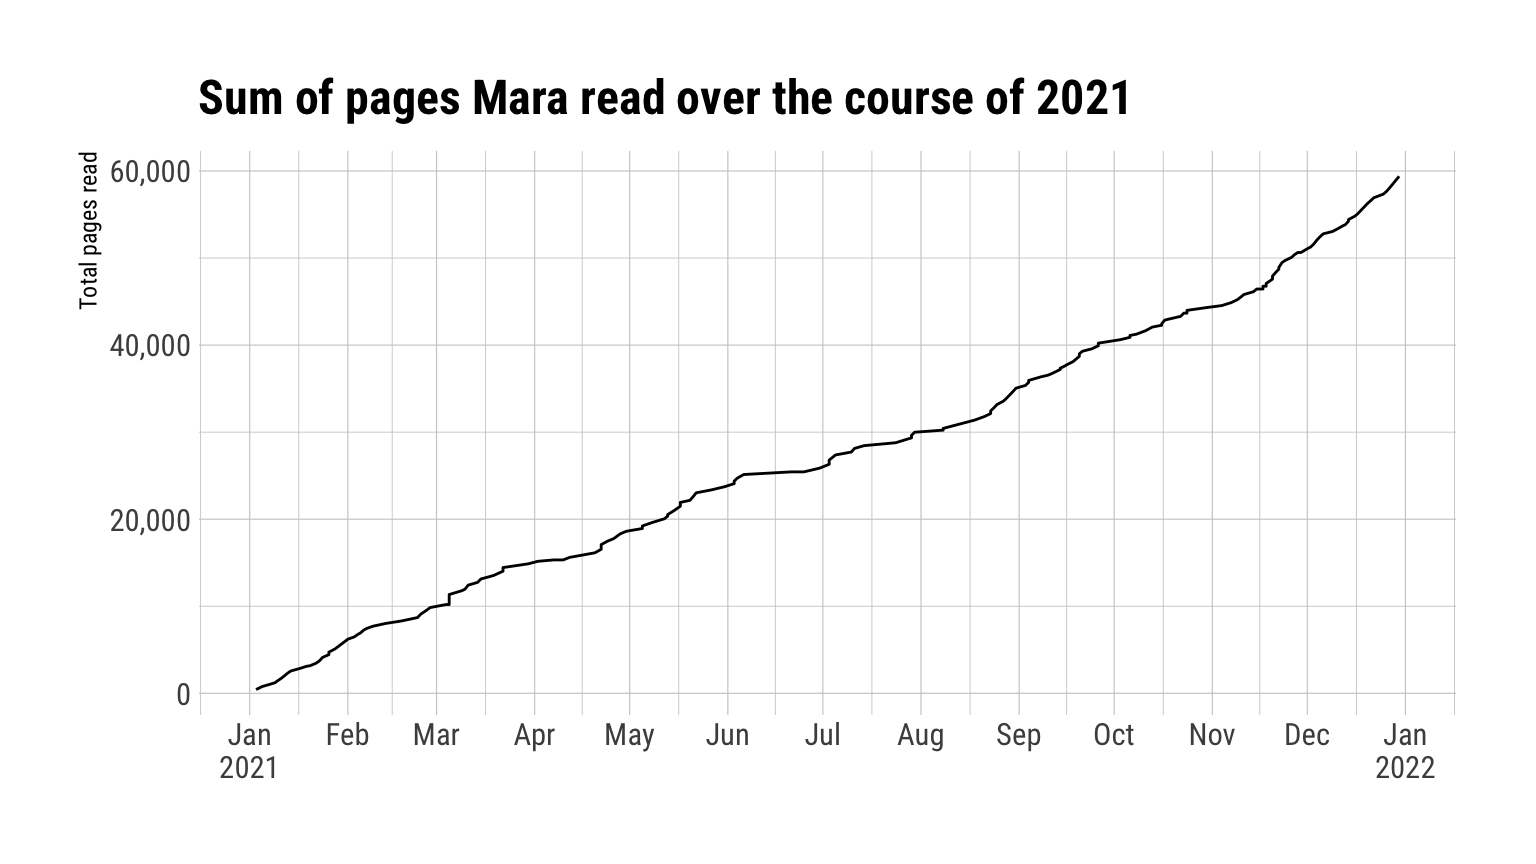 With x-axis range from January 2021 to January 2022, shows relatively steady increase in cumulative sum of pages read over time (from zero to ~60000, where y-max = 59390).